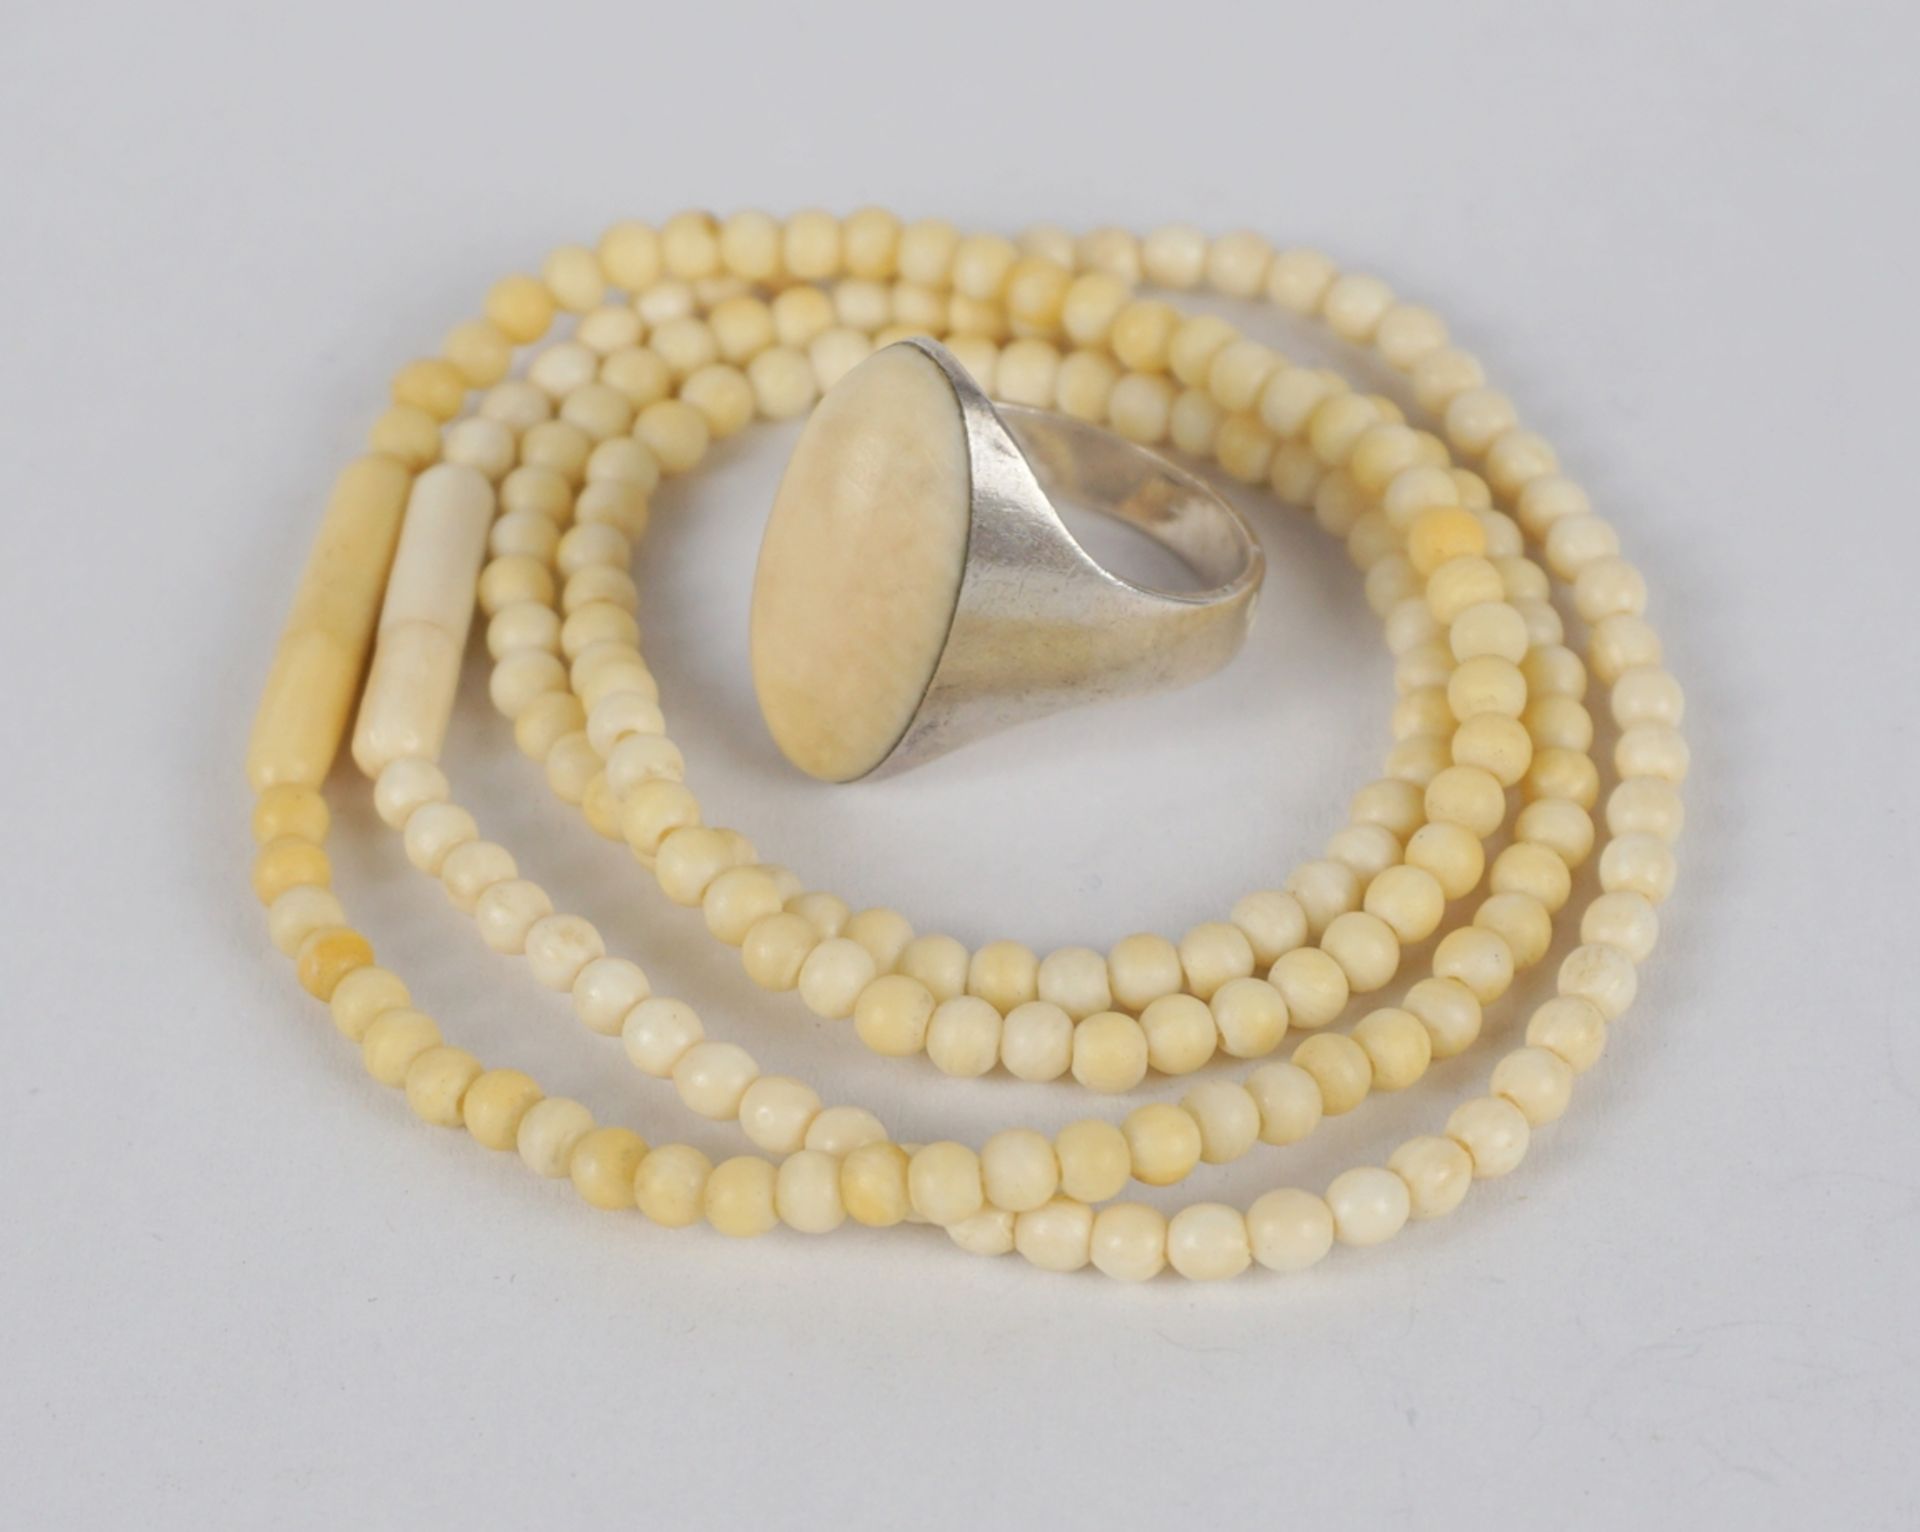 Silver ring with ivory cabochon and chain with bracelet, bone, 1920s